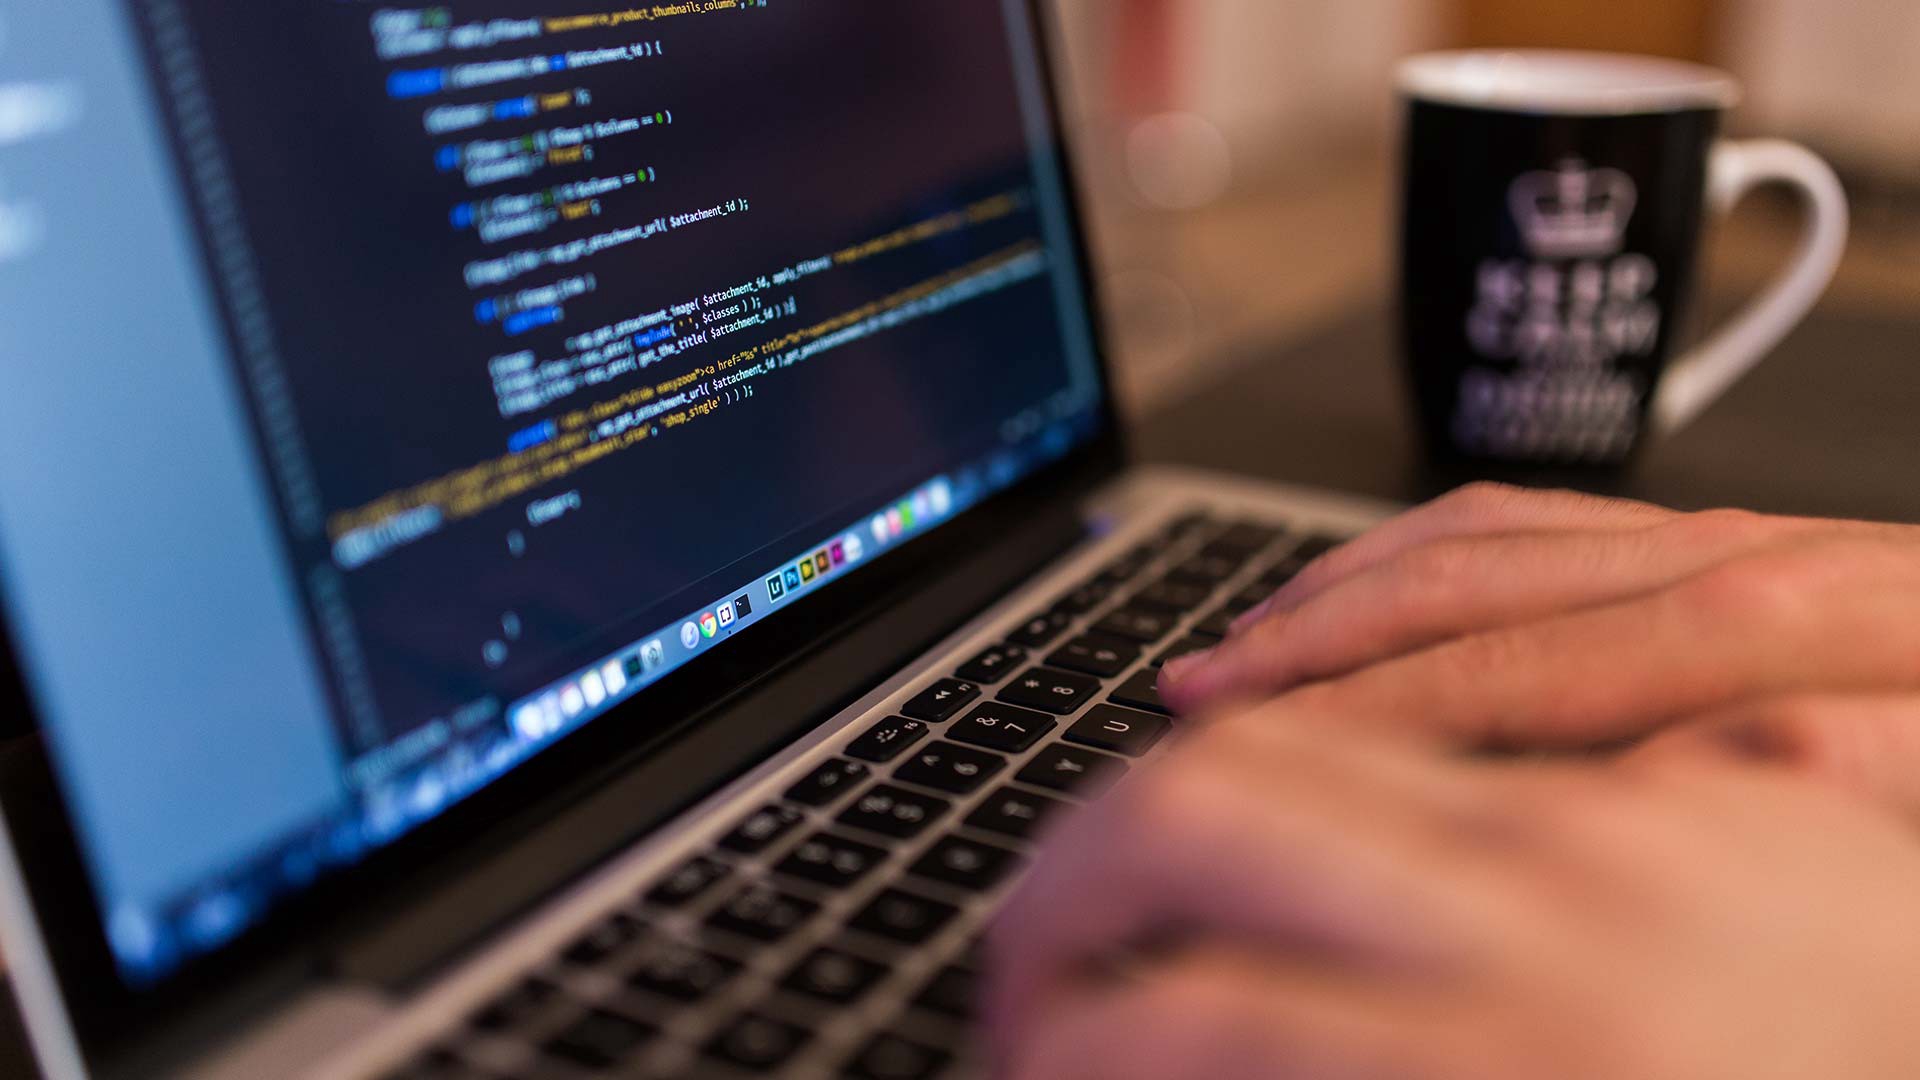 What makes you an exceptional web developer?